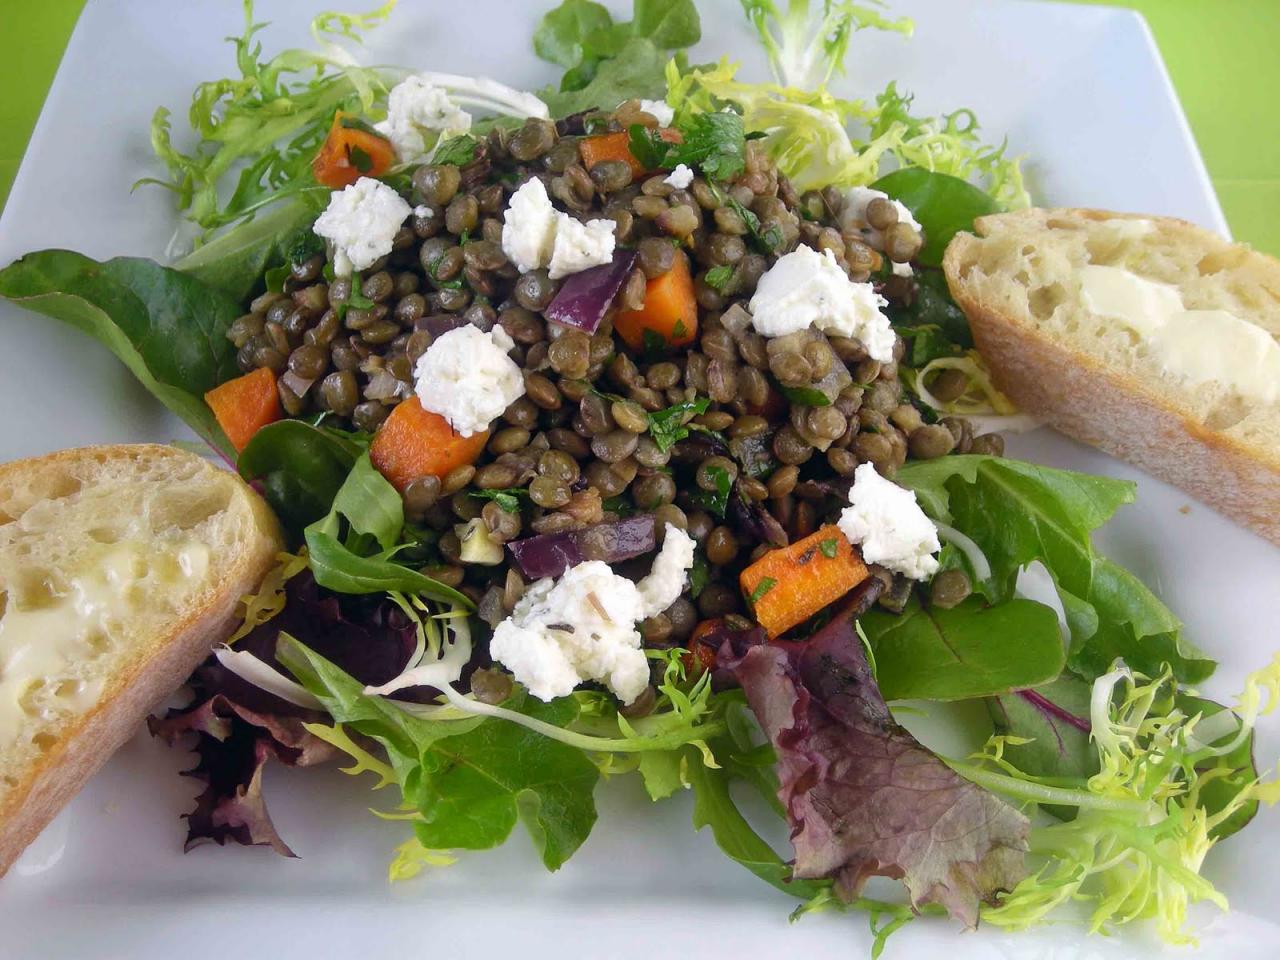 My Carolina Kitchen: French Lentil Salad with Goat Cheese and Fontaine de  Vaucluse in Provence